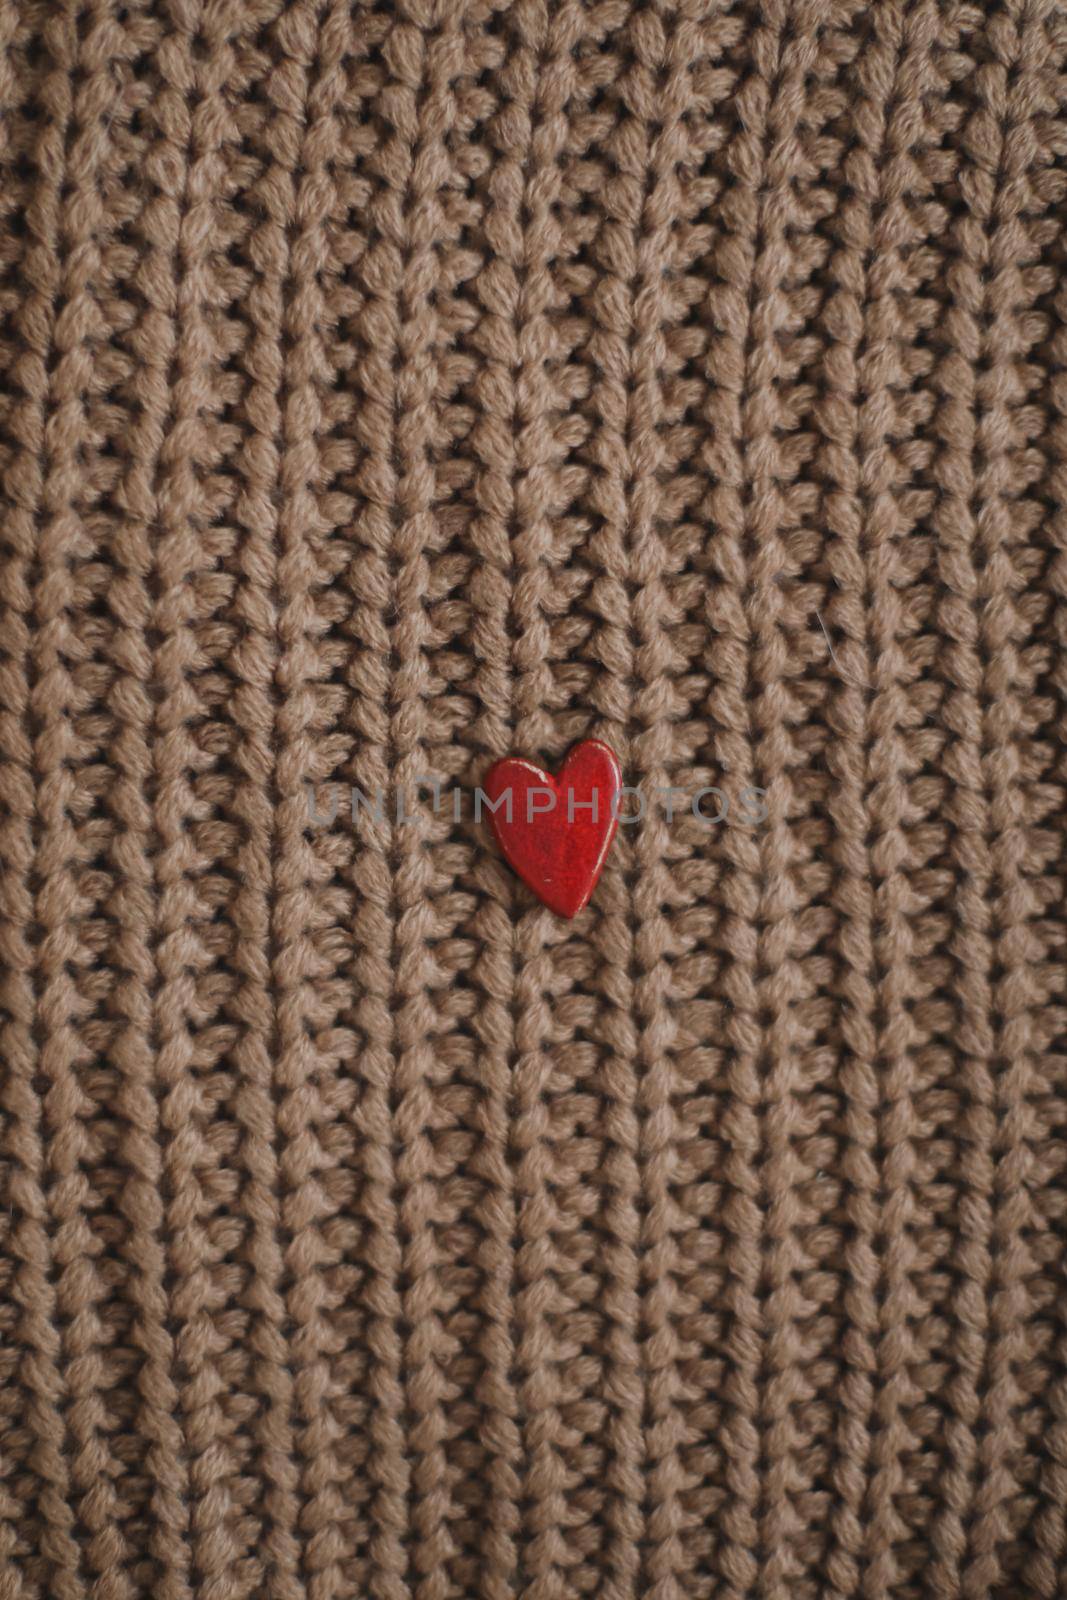 Decorative red heart on beige knitted sweater. Valentines day or love concept